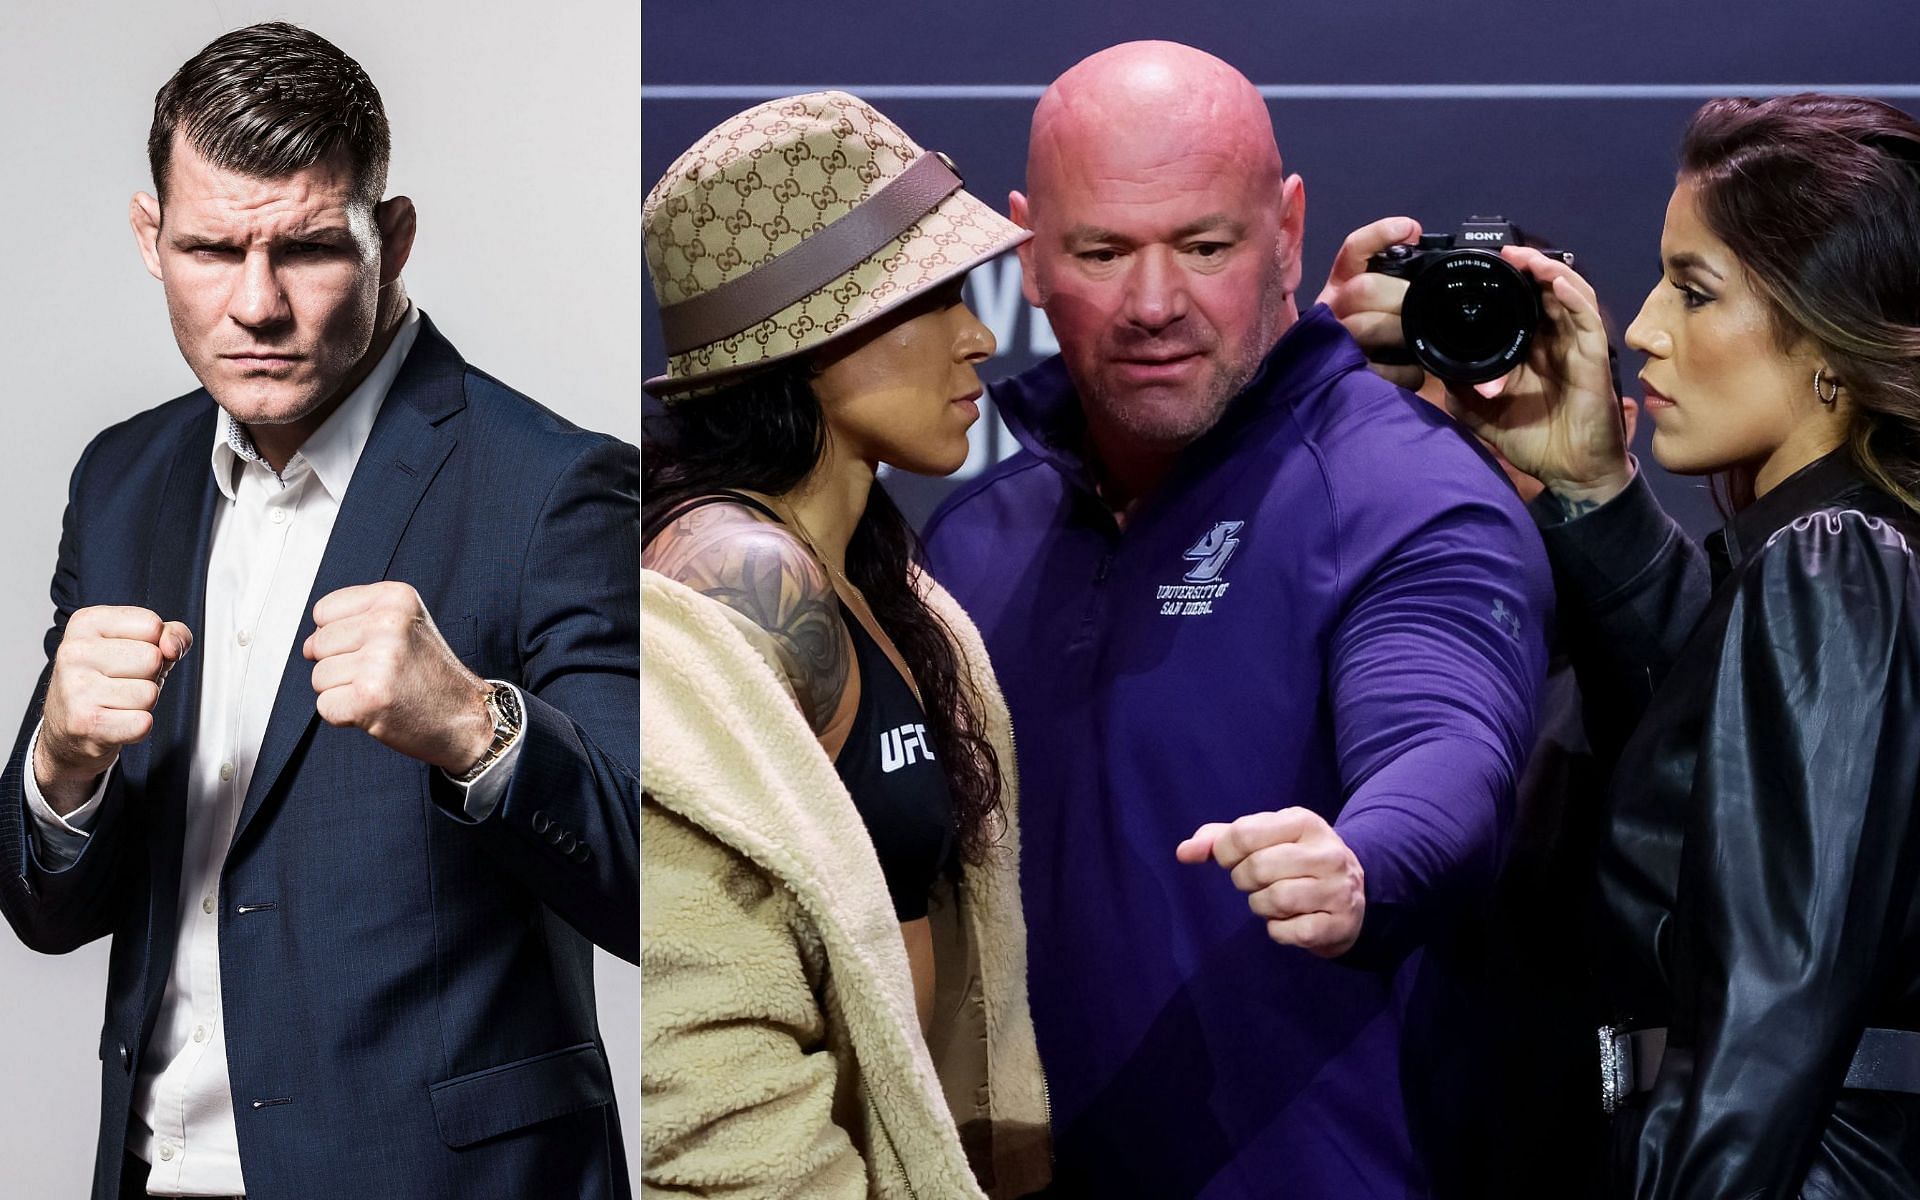 Michael Bisping weighs in on the potential rematch between Amanda Nunes and Julianna Pena